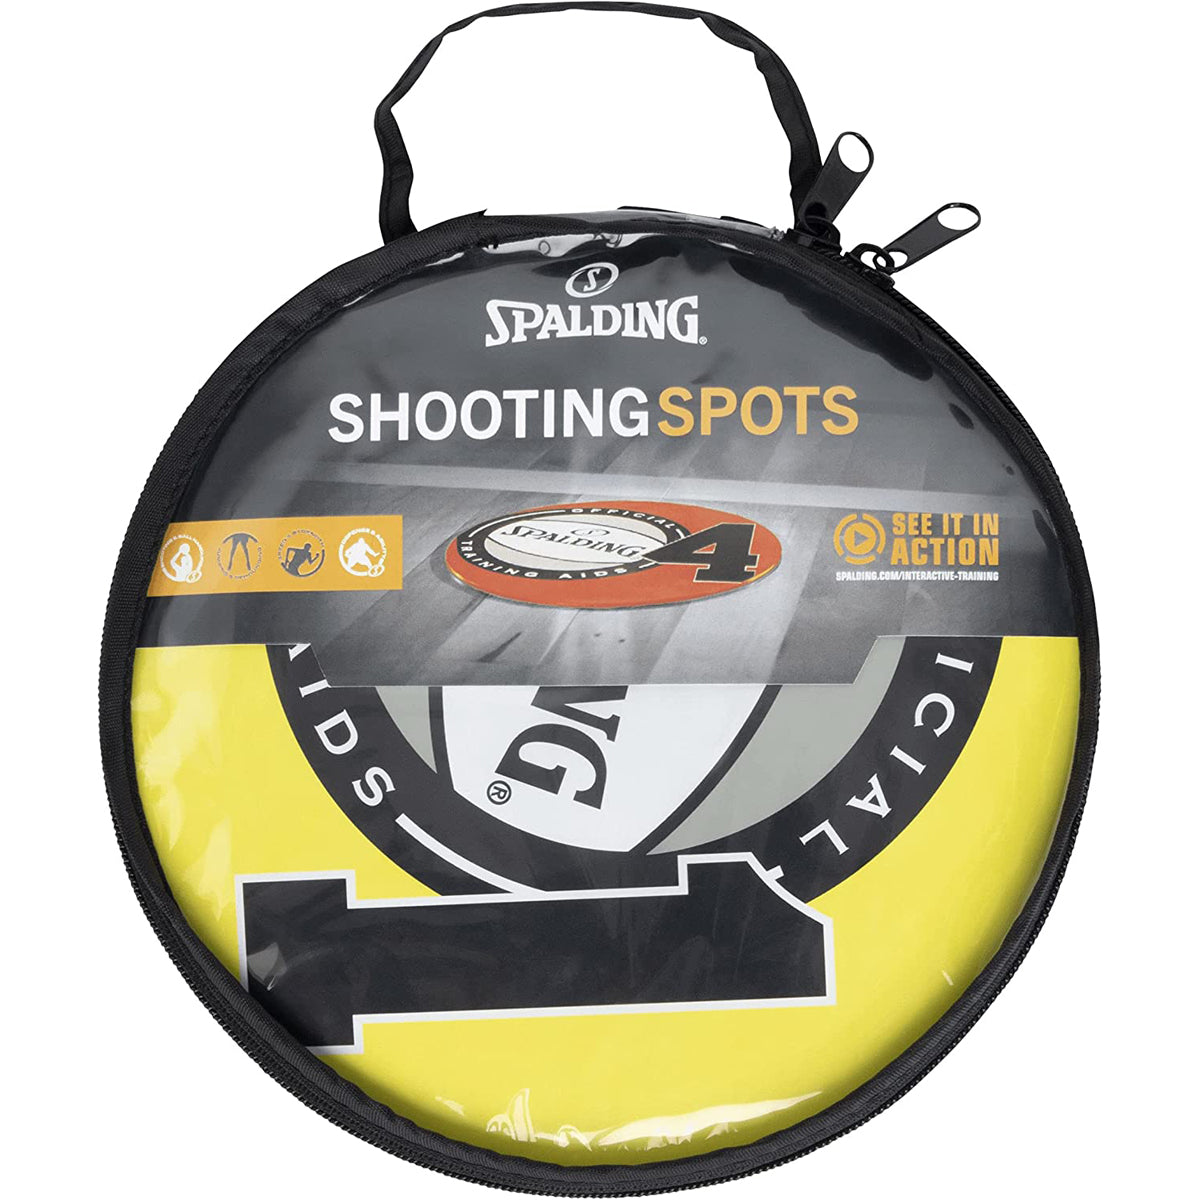 Spalding Shooting Spots Training Aid 5-Pack - Multicolor Spalding